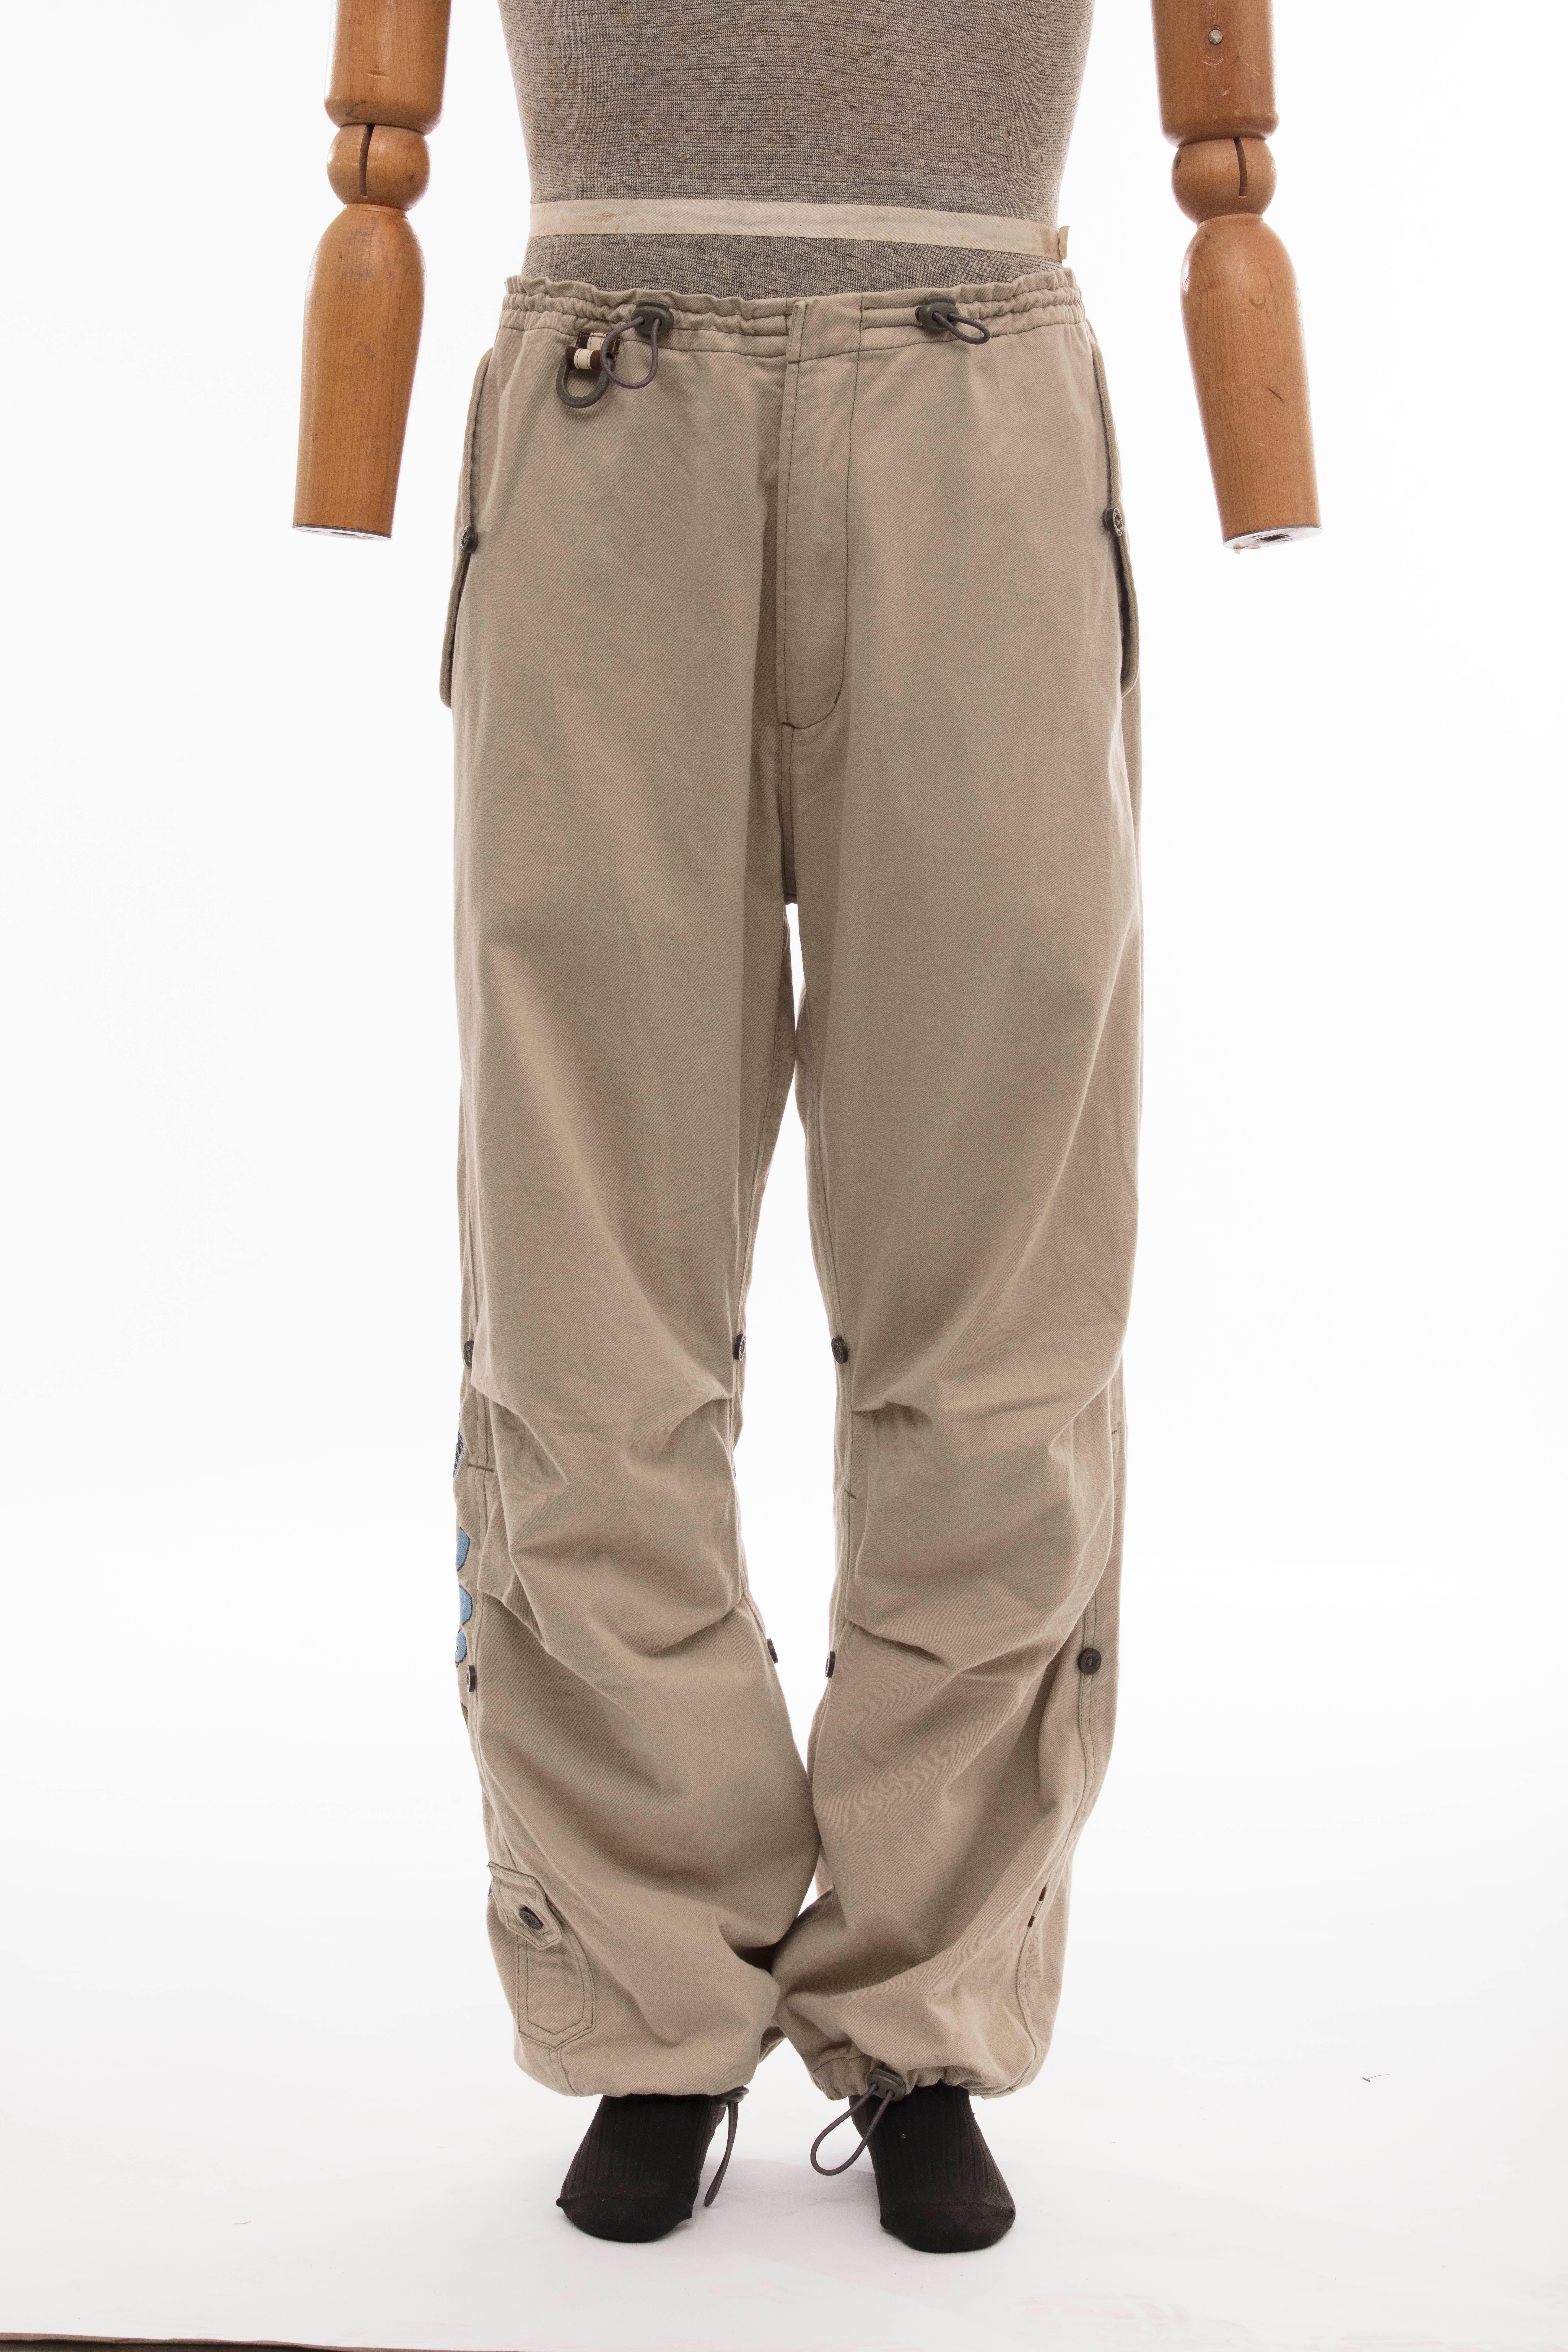  Maharishi, Circa 2004 men's khaki cotton utility pants with dual slit pockets at sides, single flap pocket at back, embroidered detail at back and drawstring pulls at waist and ankles.

Size: XL

Waist: 36, Rise 13.5, Inseam 30, Leg Opening 14
